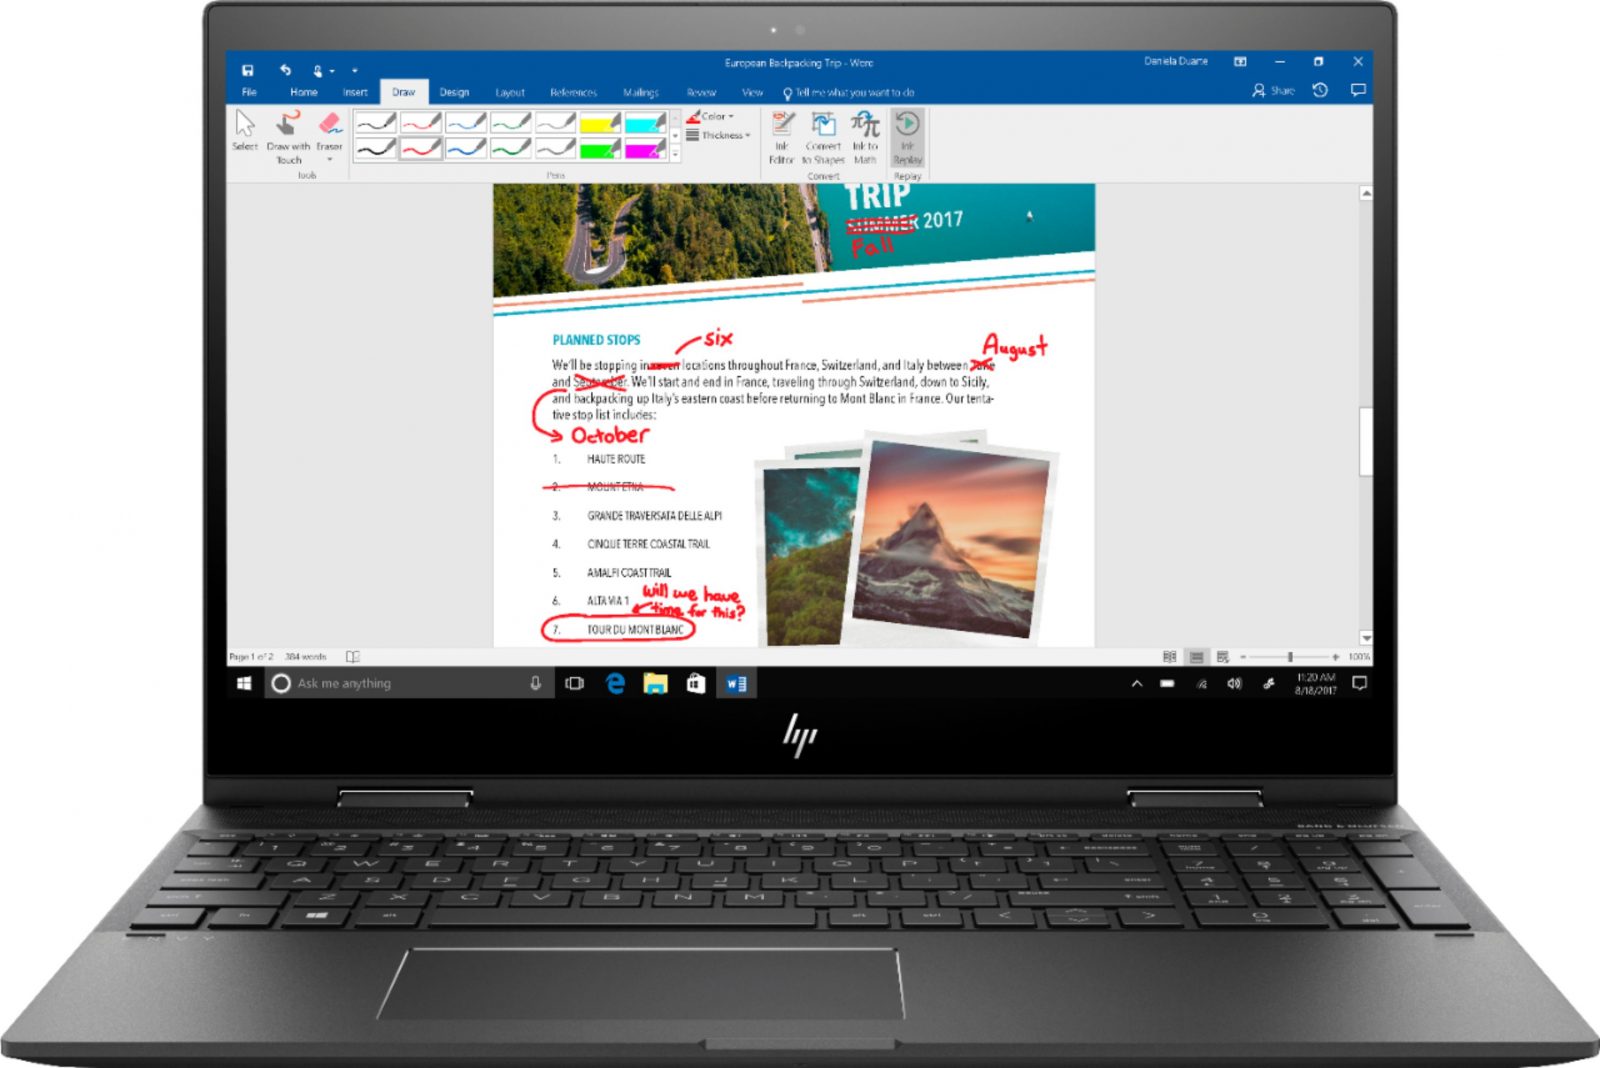 HP Envy x360 Laptop at Best Buy - Tech review by Misty Nelson frostedevents.com 